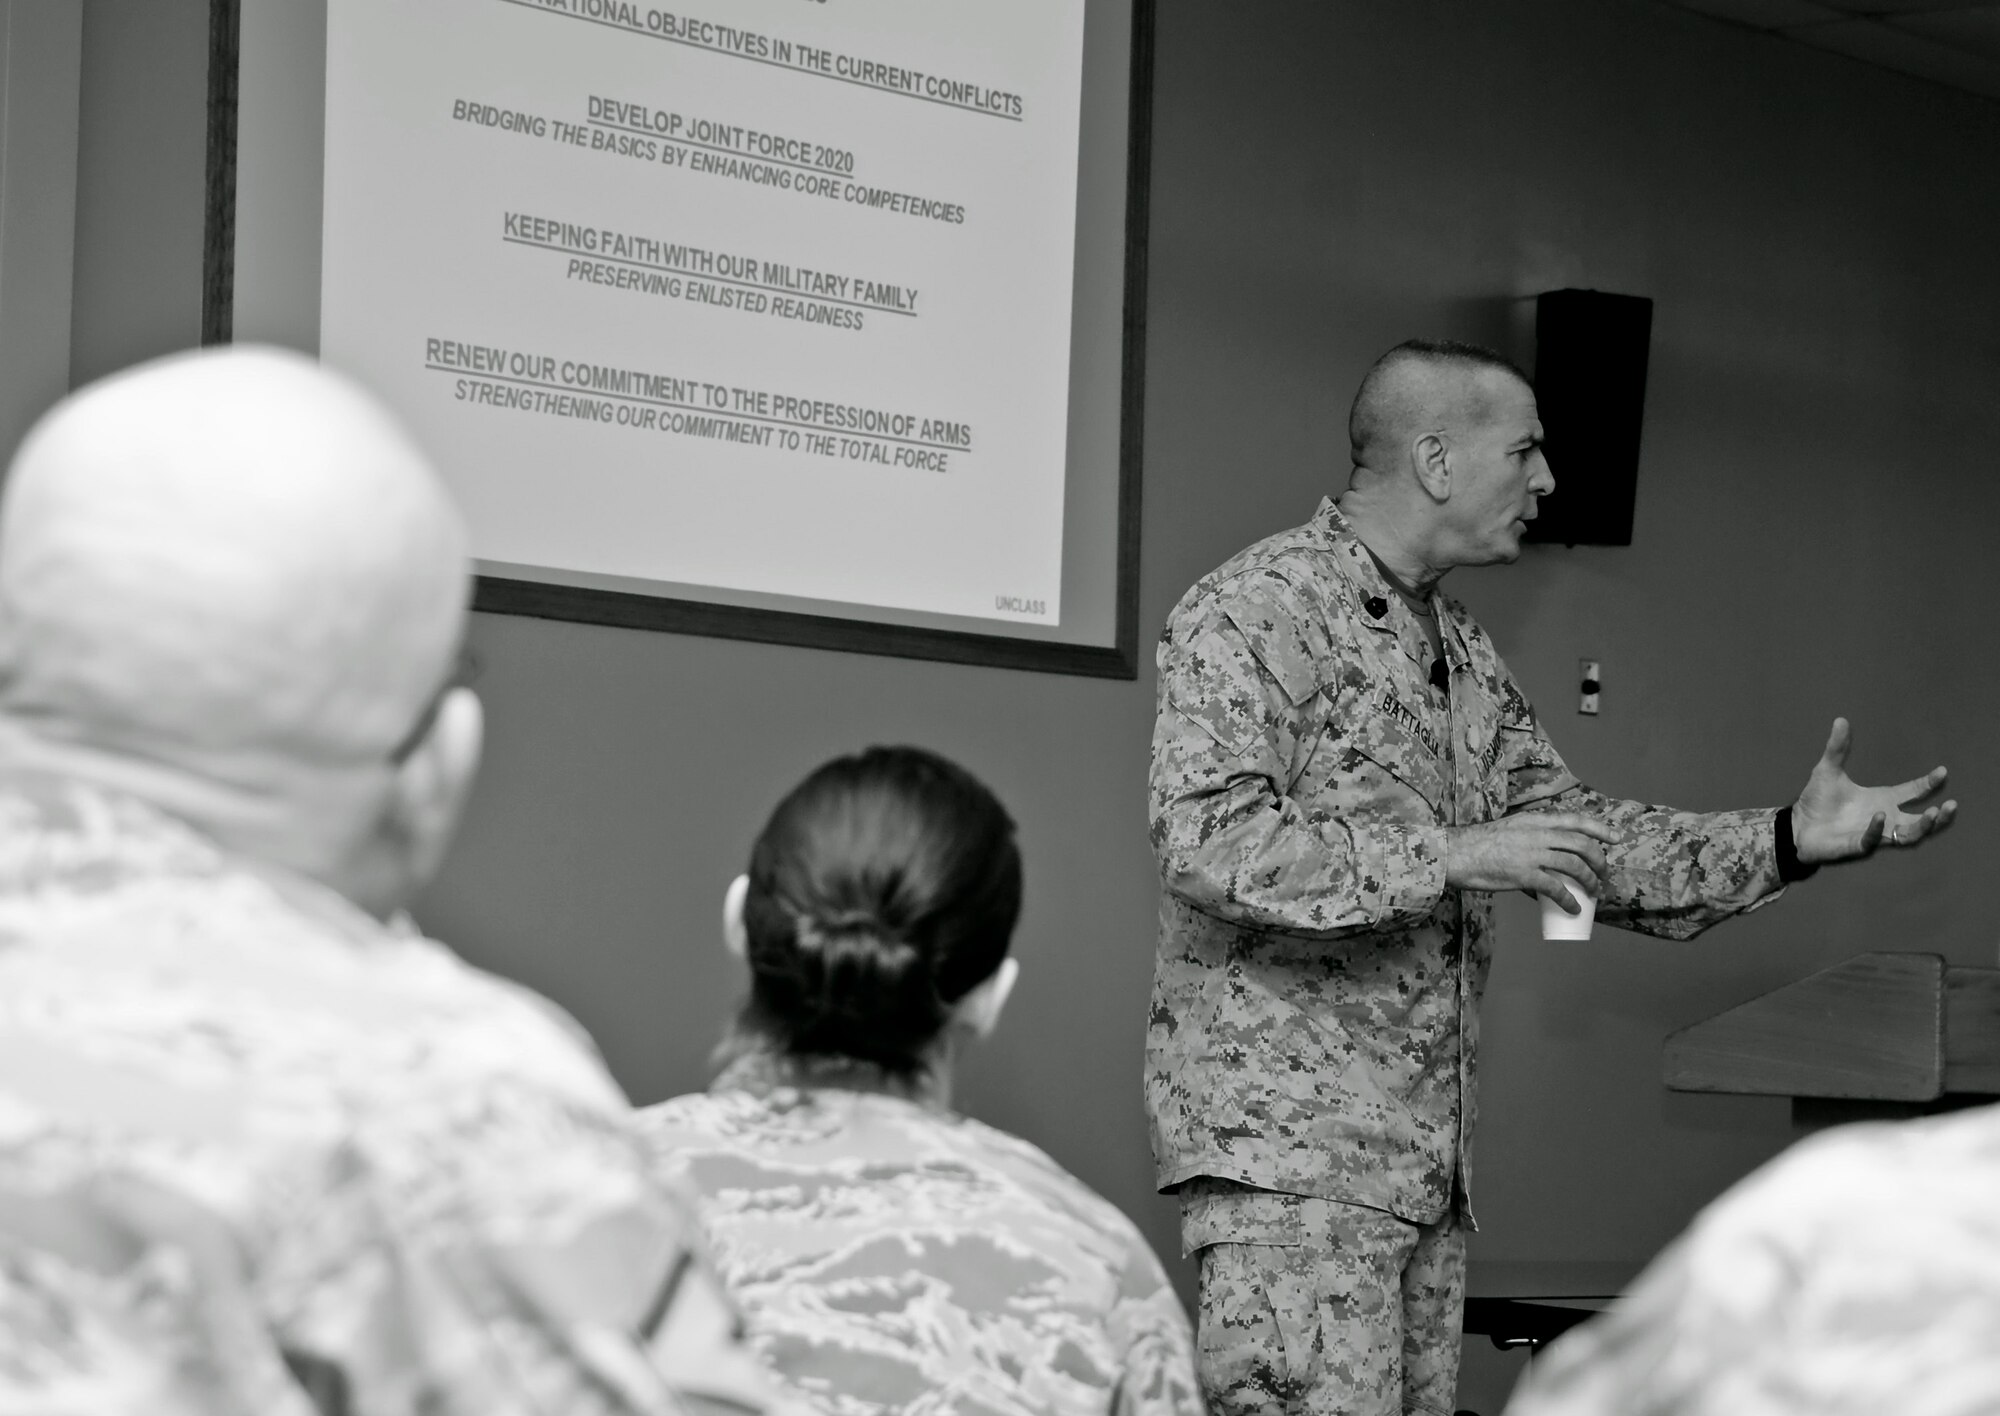 U.S. Marine Sgt. Maj. Bryan Battaglia, the senior non-commissioned officer of the U.S. Armed Forces, speaks to Illinois soldiers and airmen at the 182nd Airlift Wing in Peoria, Ill., April 6, 2013. The photo was one of five by Staff Sgt. Lealan C. Buehrer, photojournalist with the 182nd Airlift Wing, submitted to the National Guard Bureau media contest. Buehrer was announced the winner of the Air National Guard Outstanding New Photographer category on Feb. 3, 2014. (U.S. Air National Guard photo by Staff Sgt. Lealan Buehrer/Released)